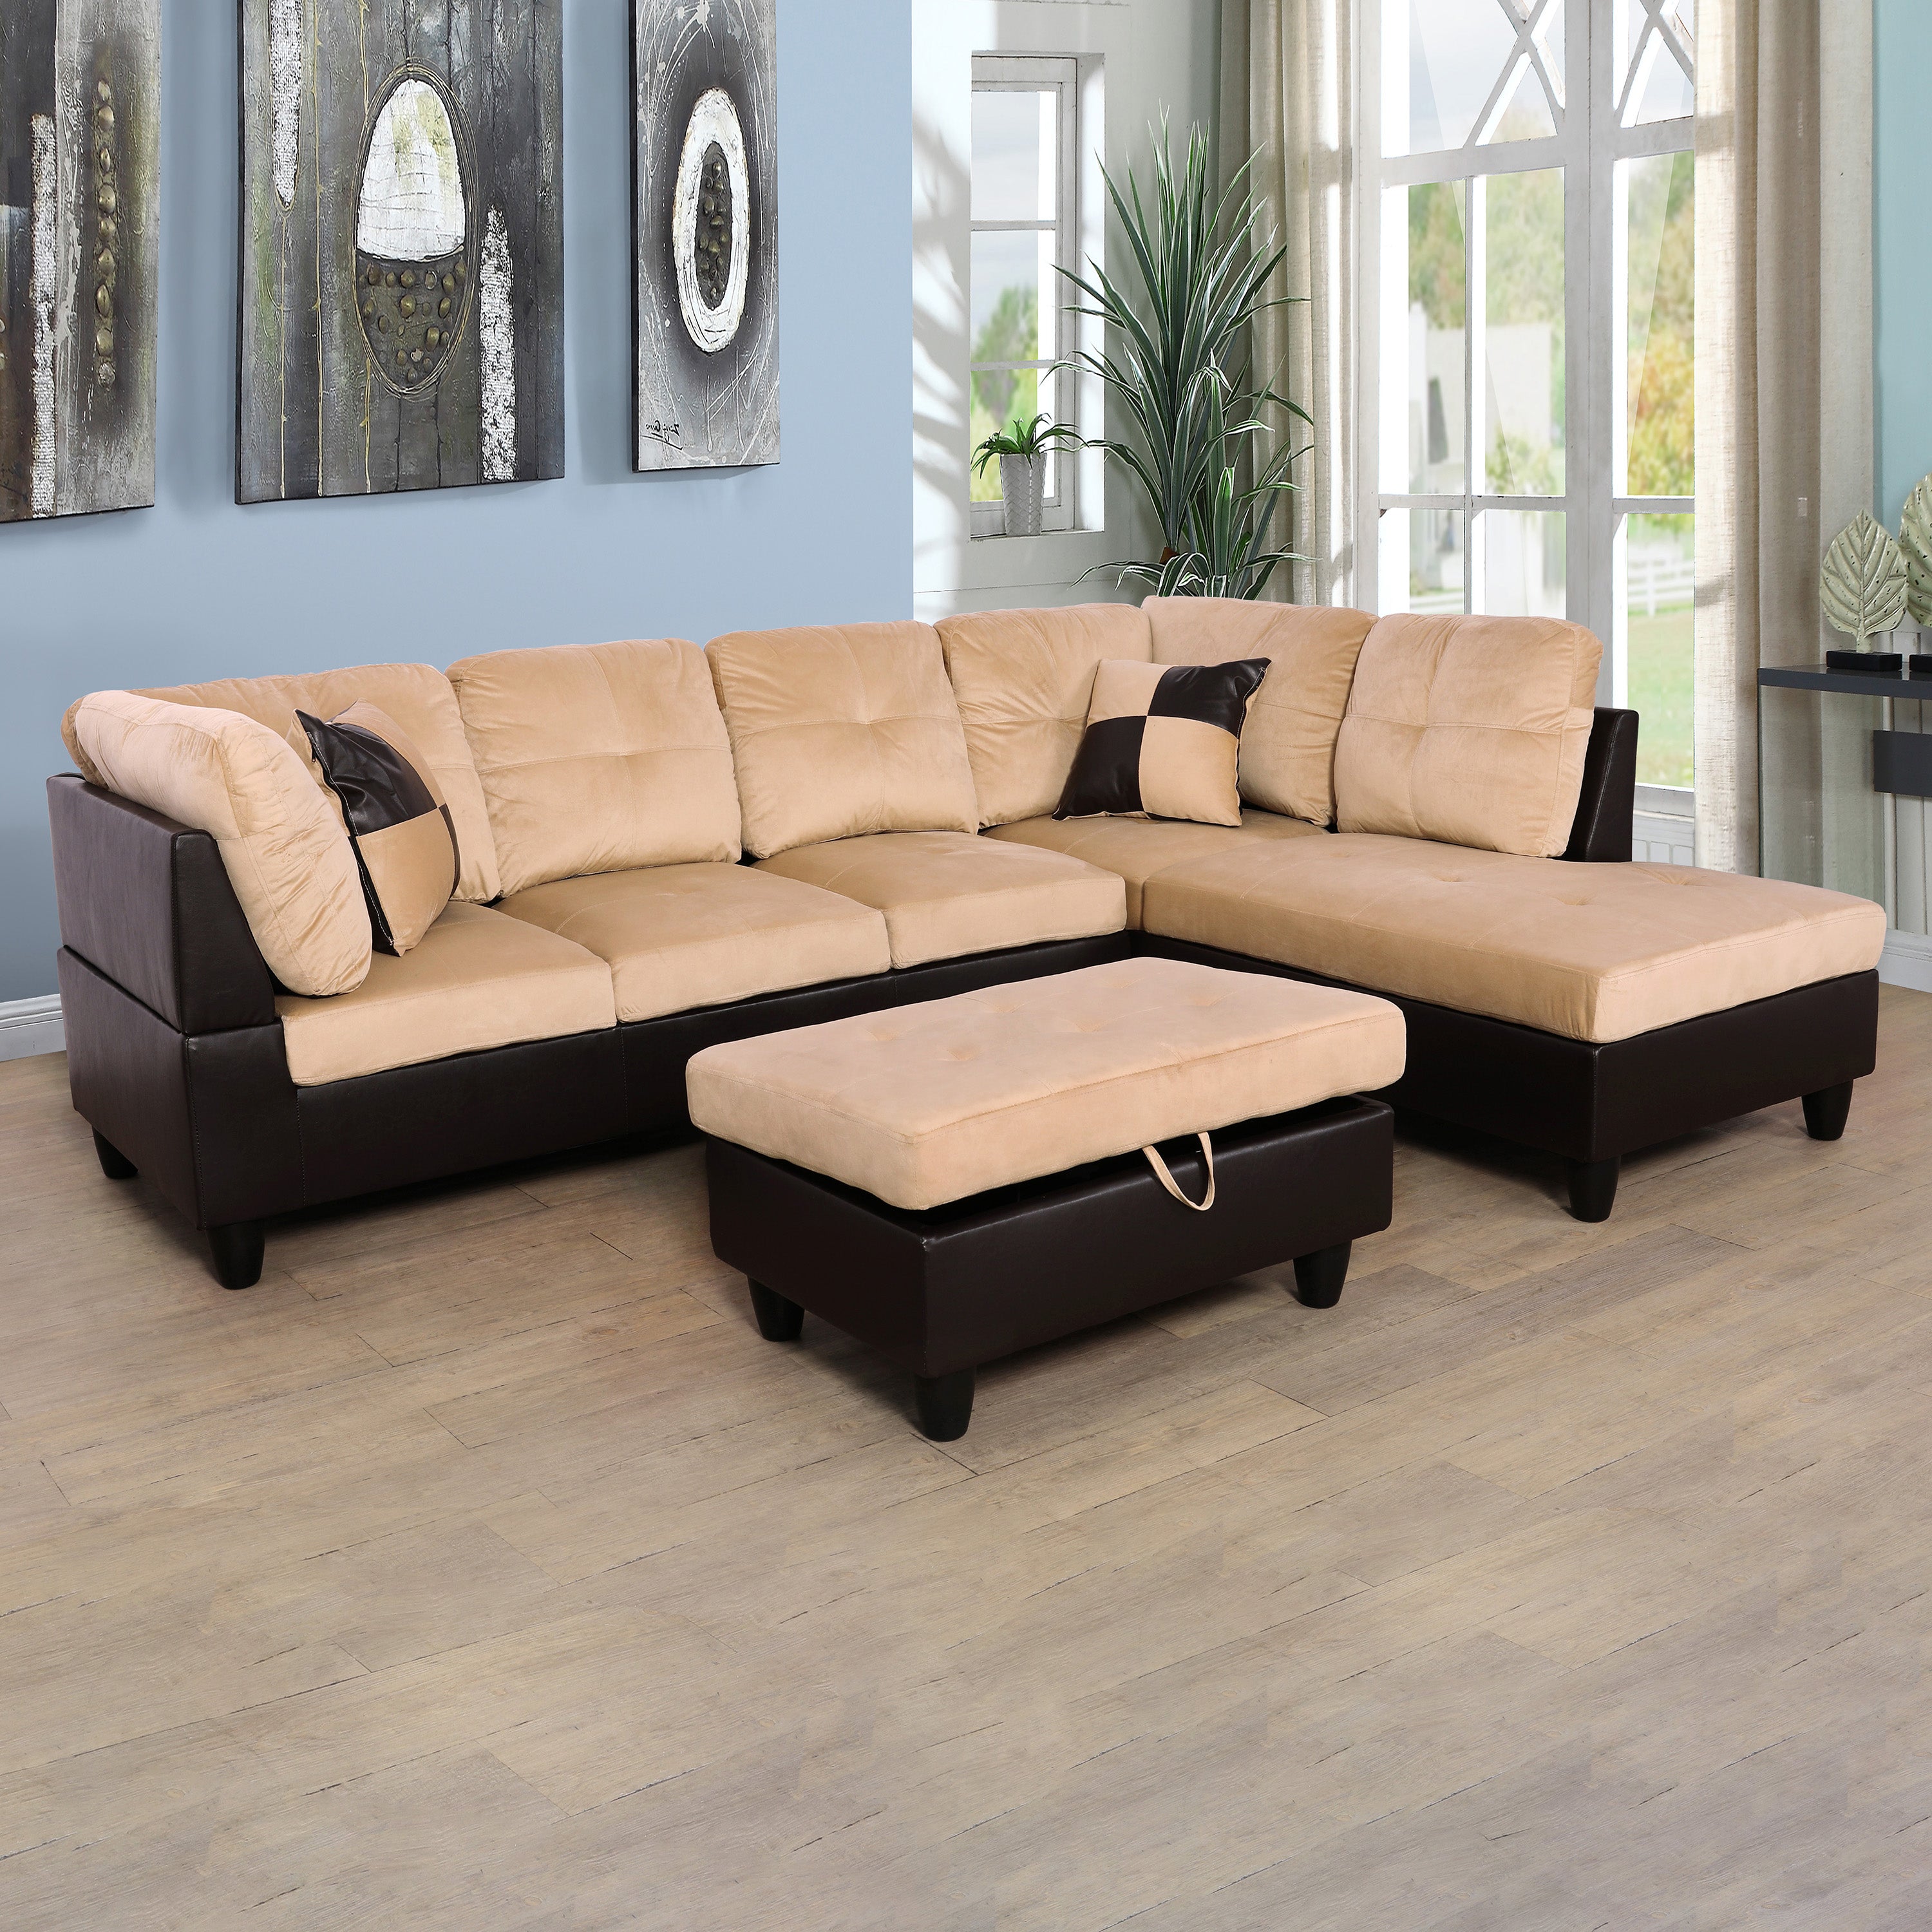 Ainehome Beige and Brown Color Lint And PVC 3-Piece Couch Living Room Sofa Set